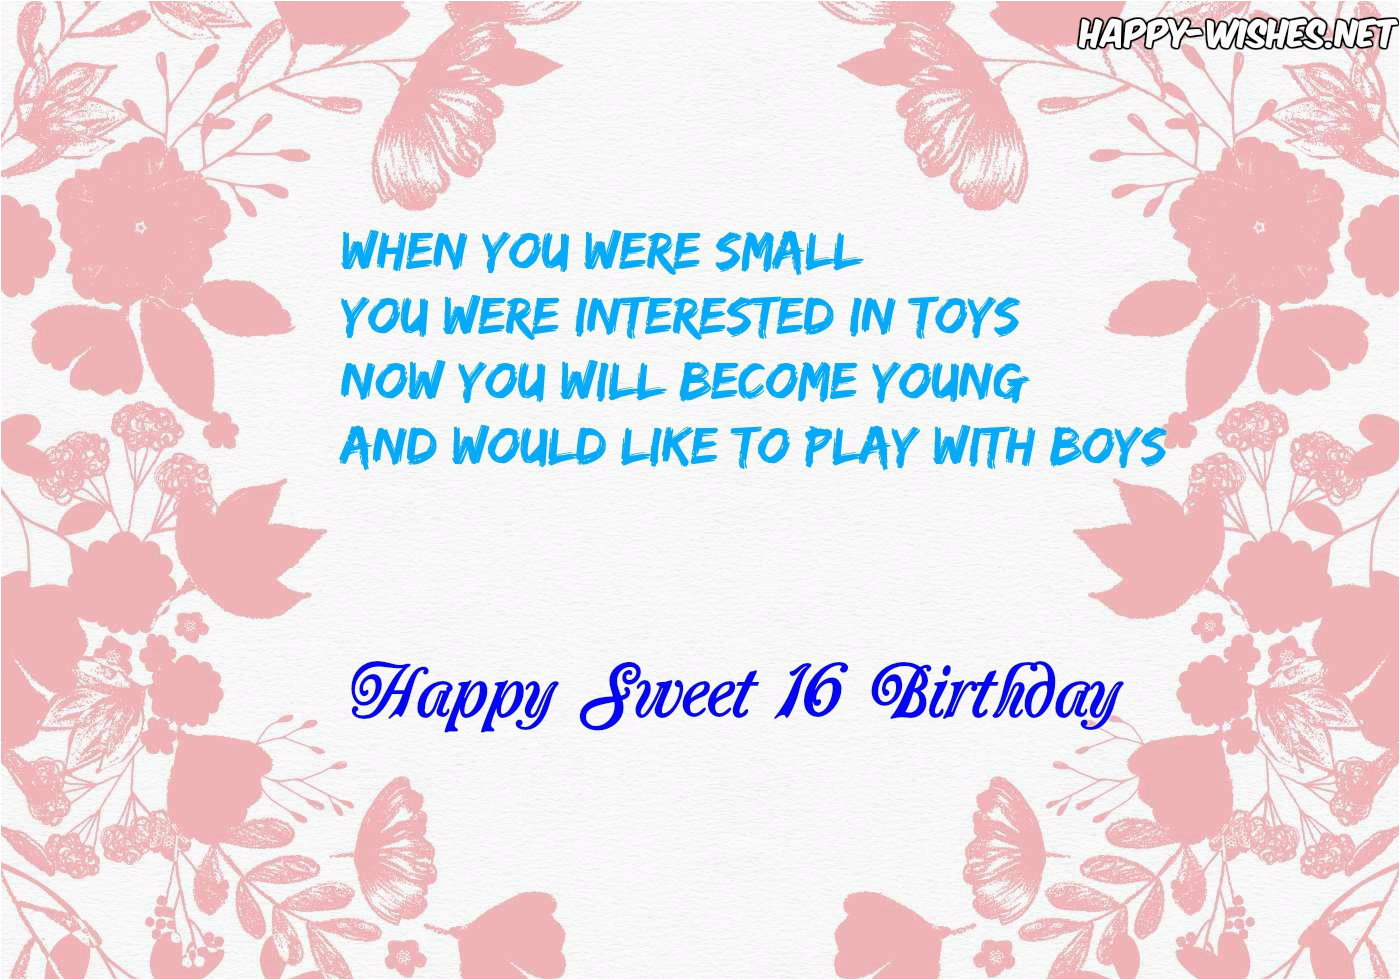 happy sweet 16 quotes images